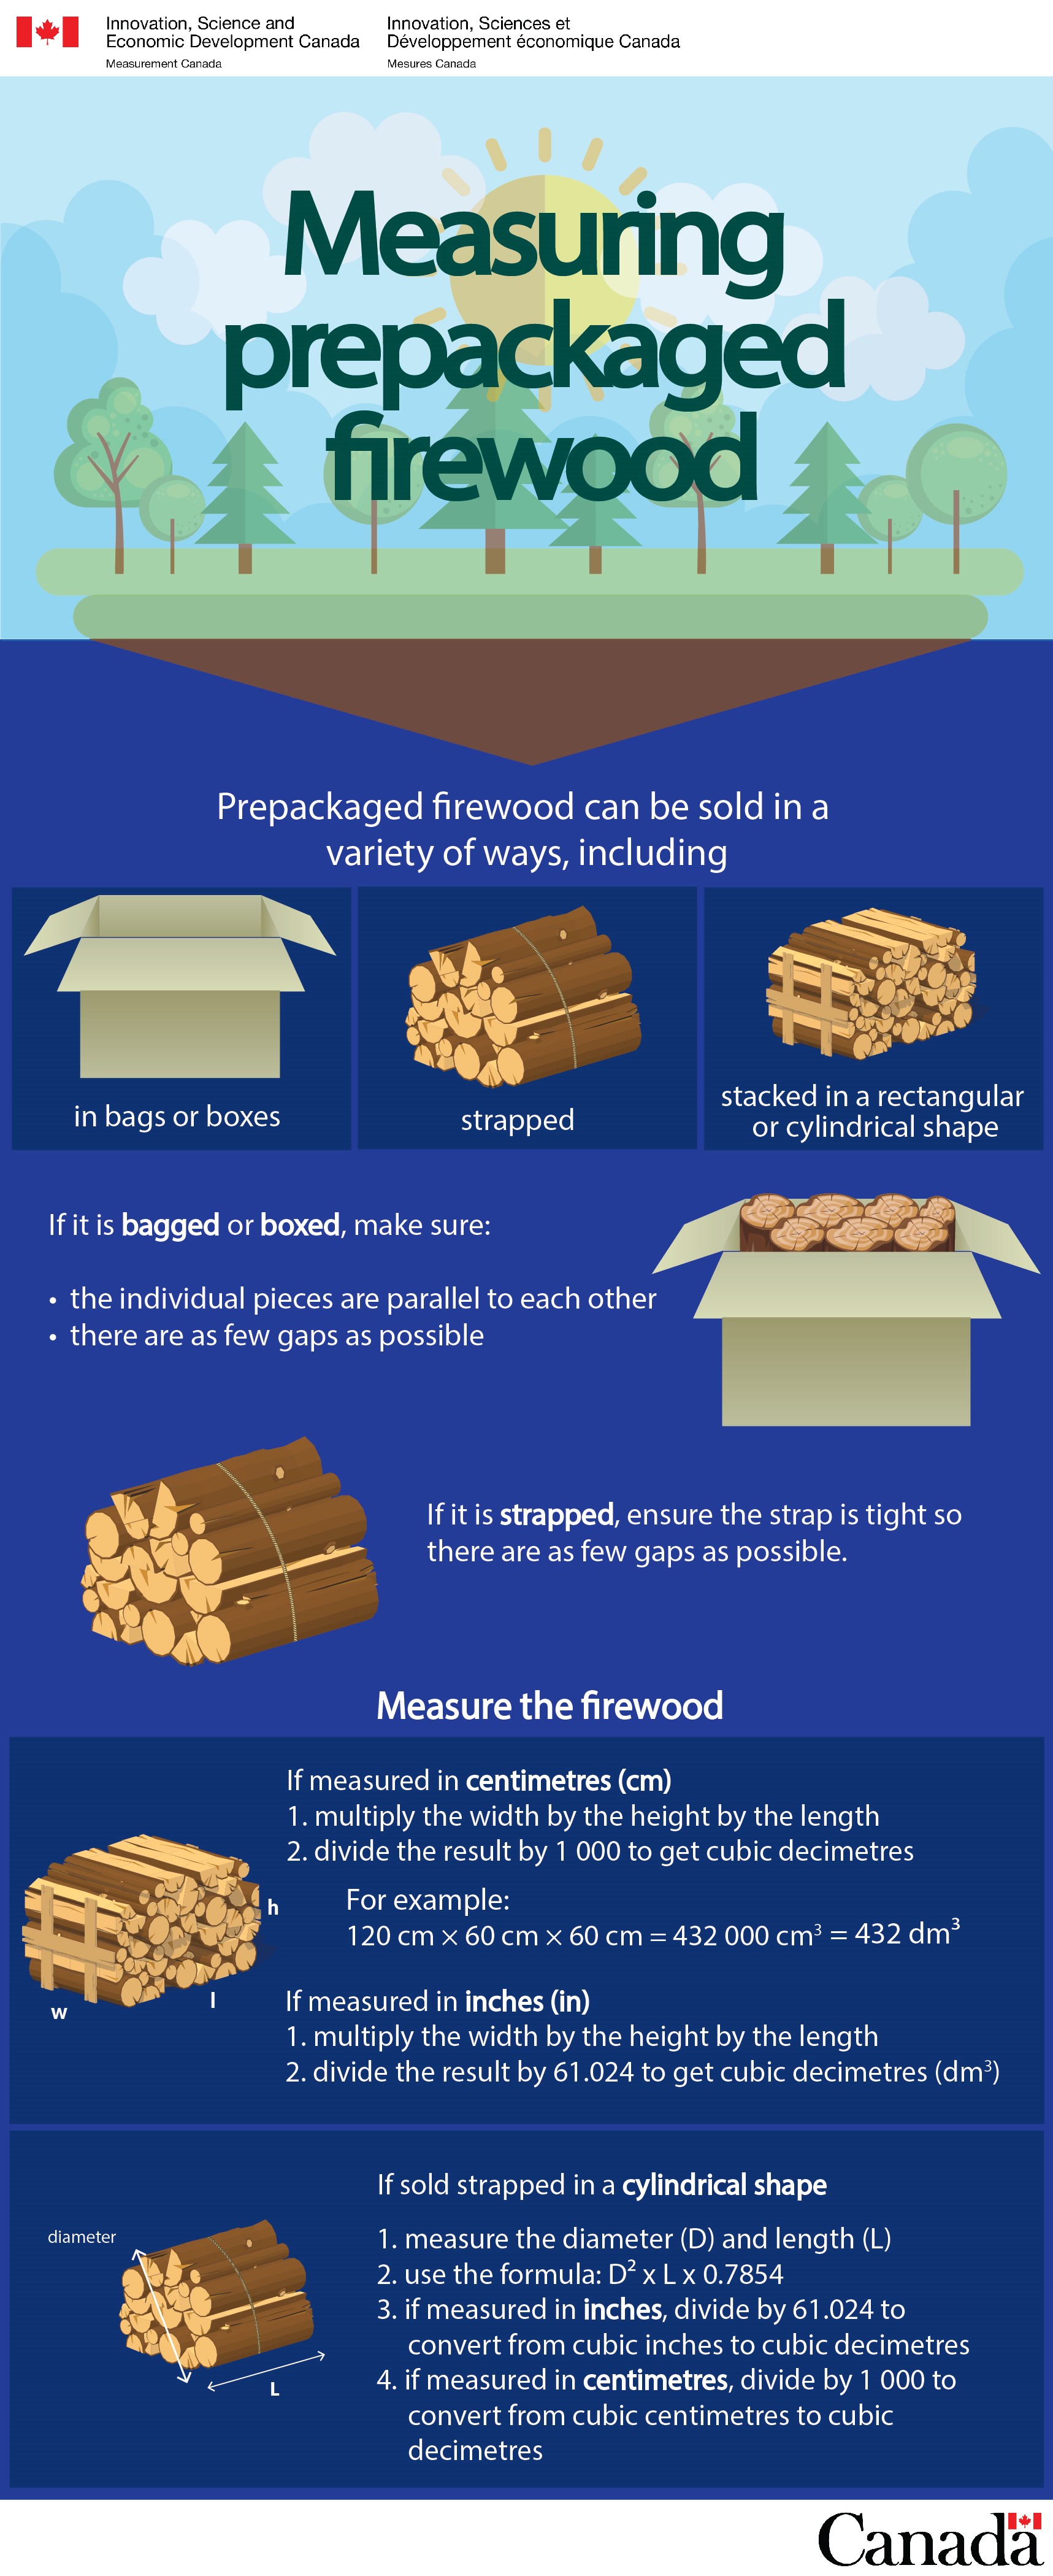 Measuring prepackaged firewood (infographic)